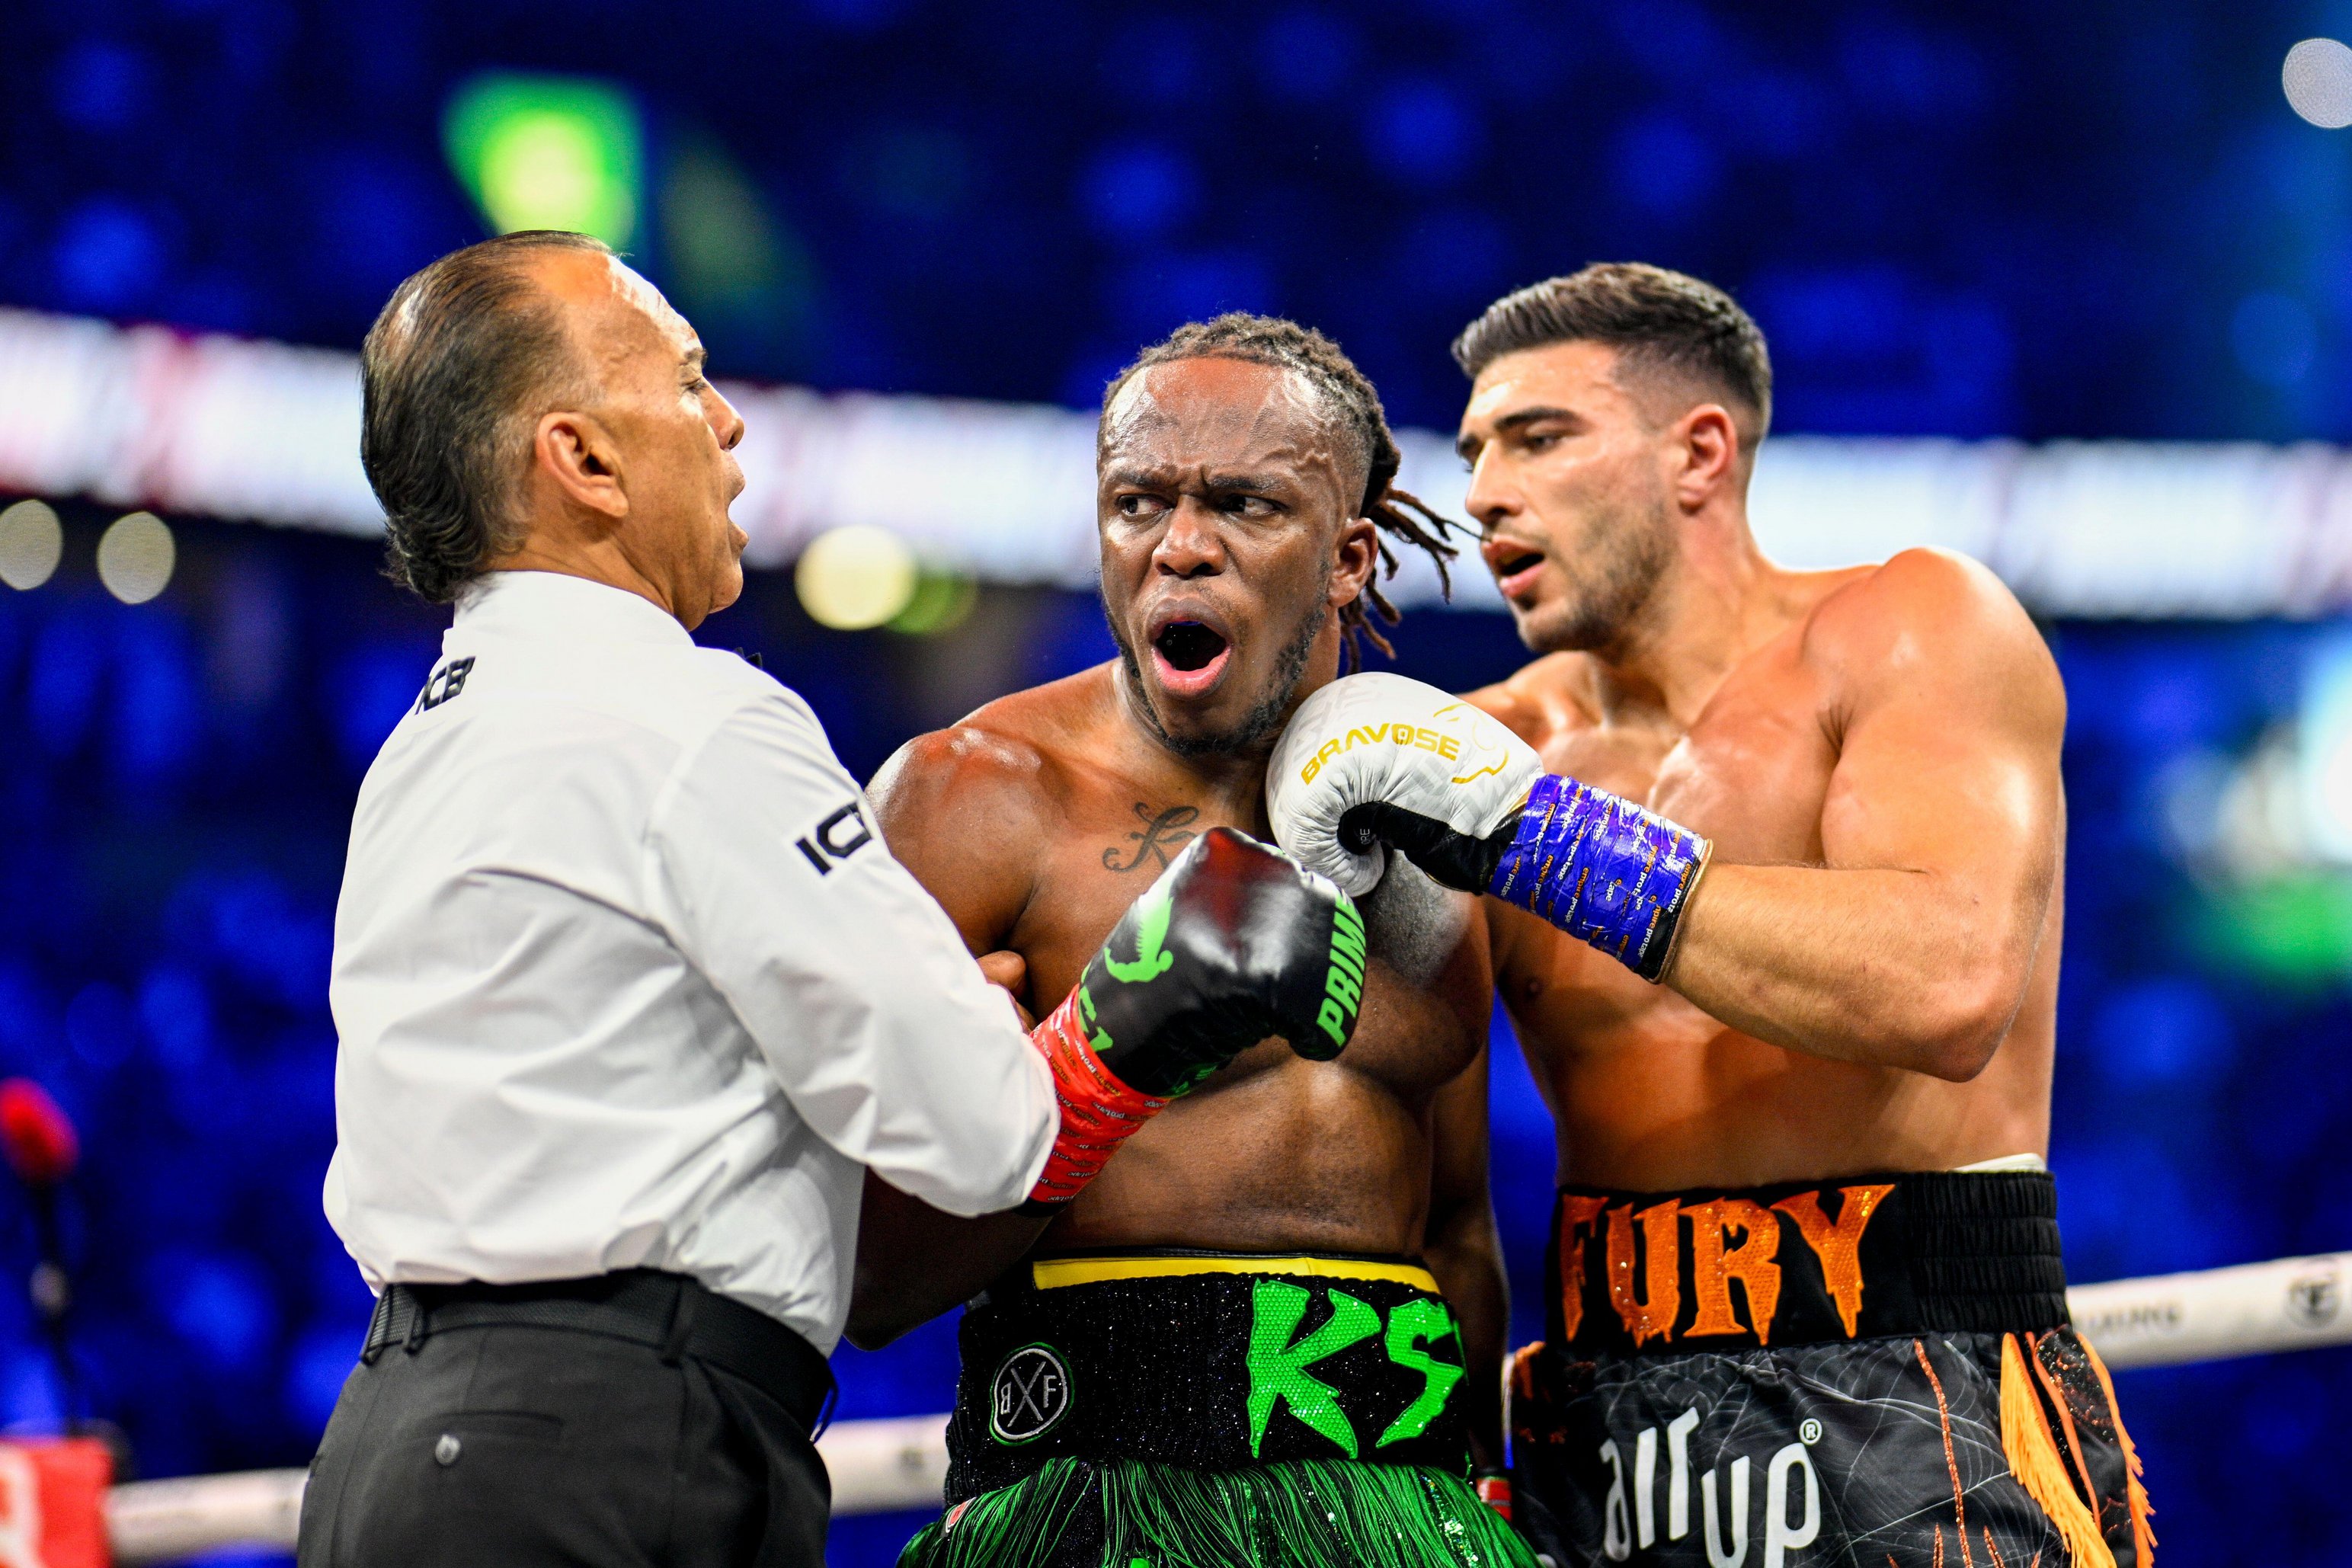 KSI was controversially beaten by Tommy Fury